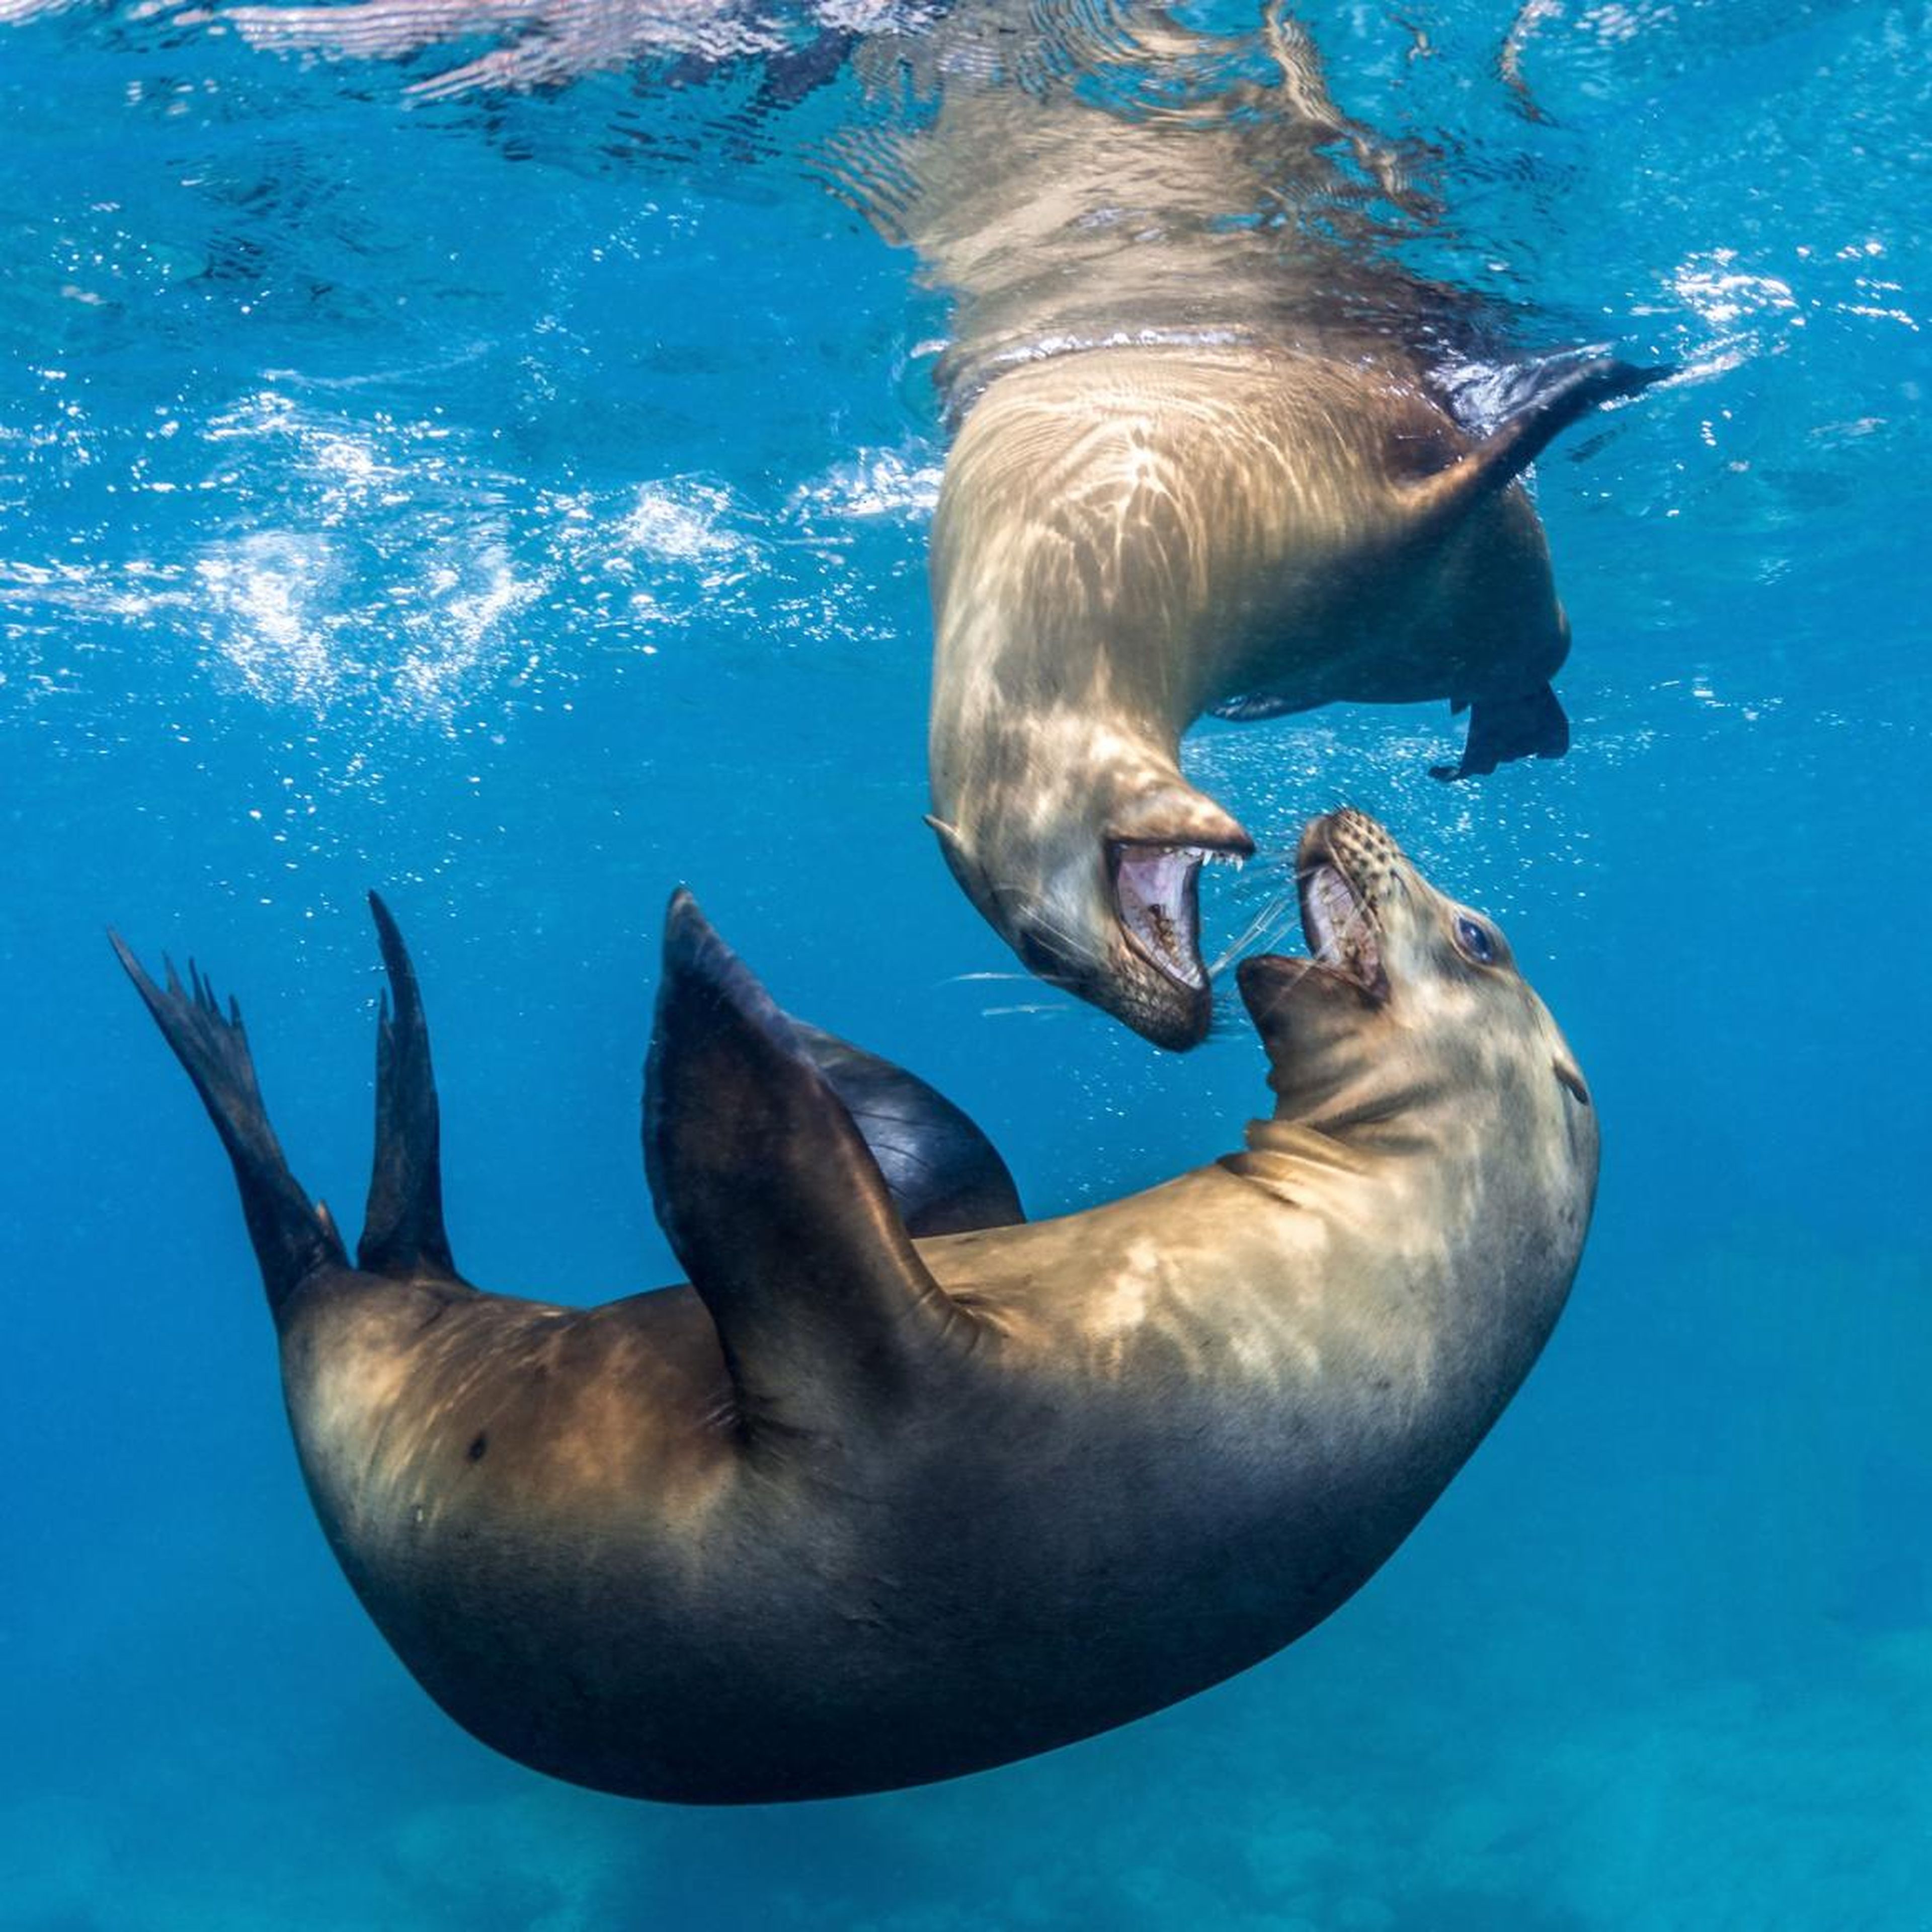 Polanszky also caught two sea lions wrestling beneath the waves in the Sea of Cortés.